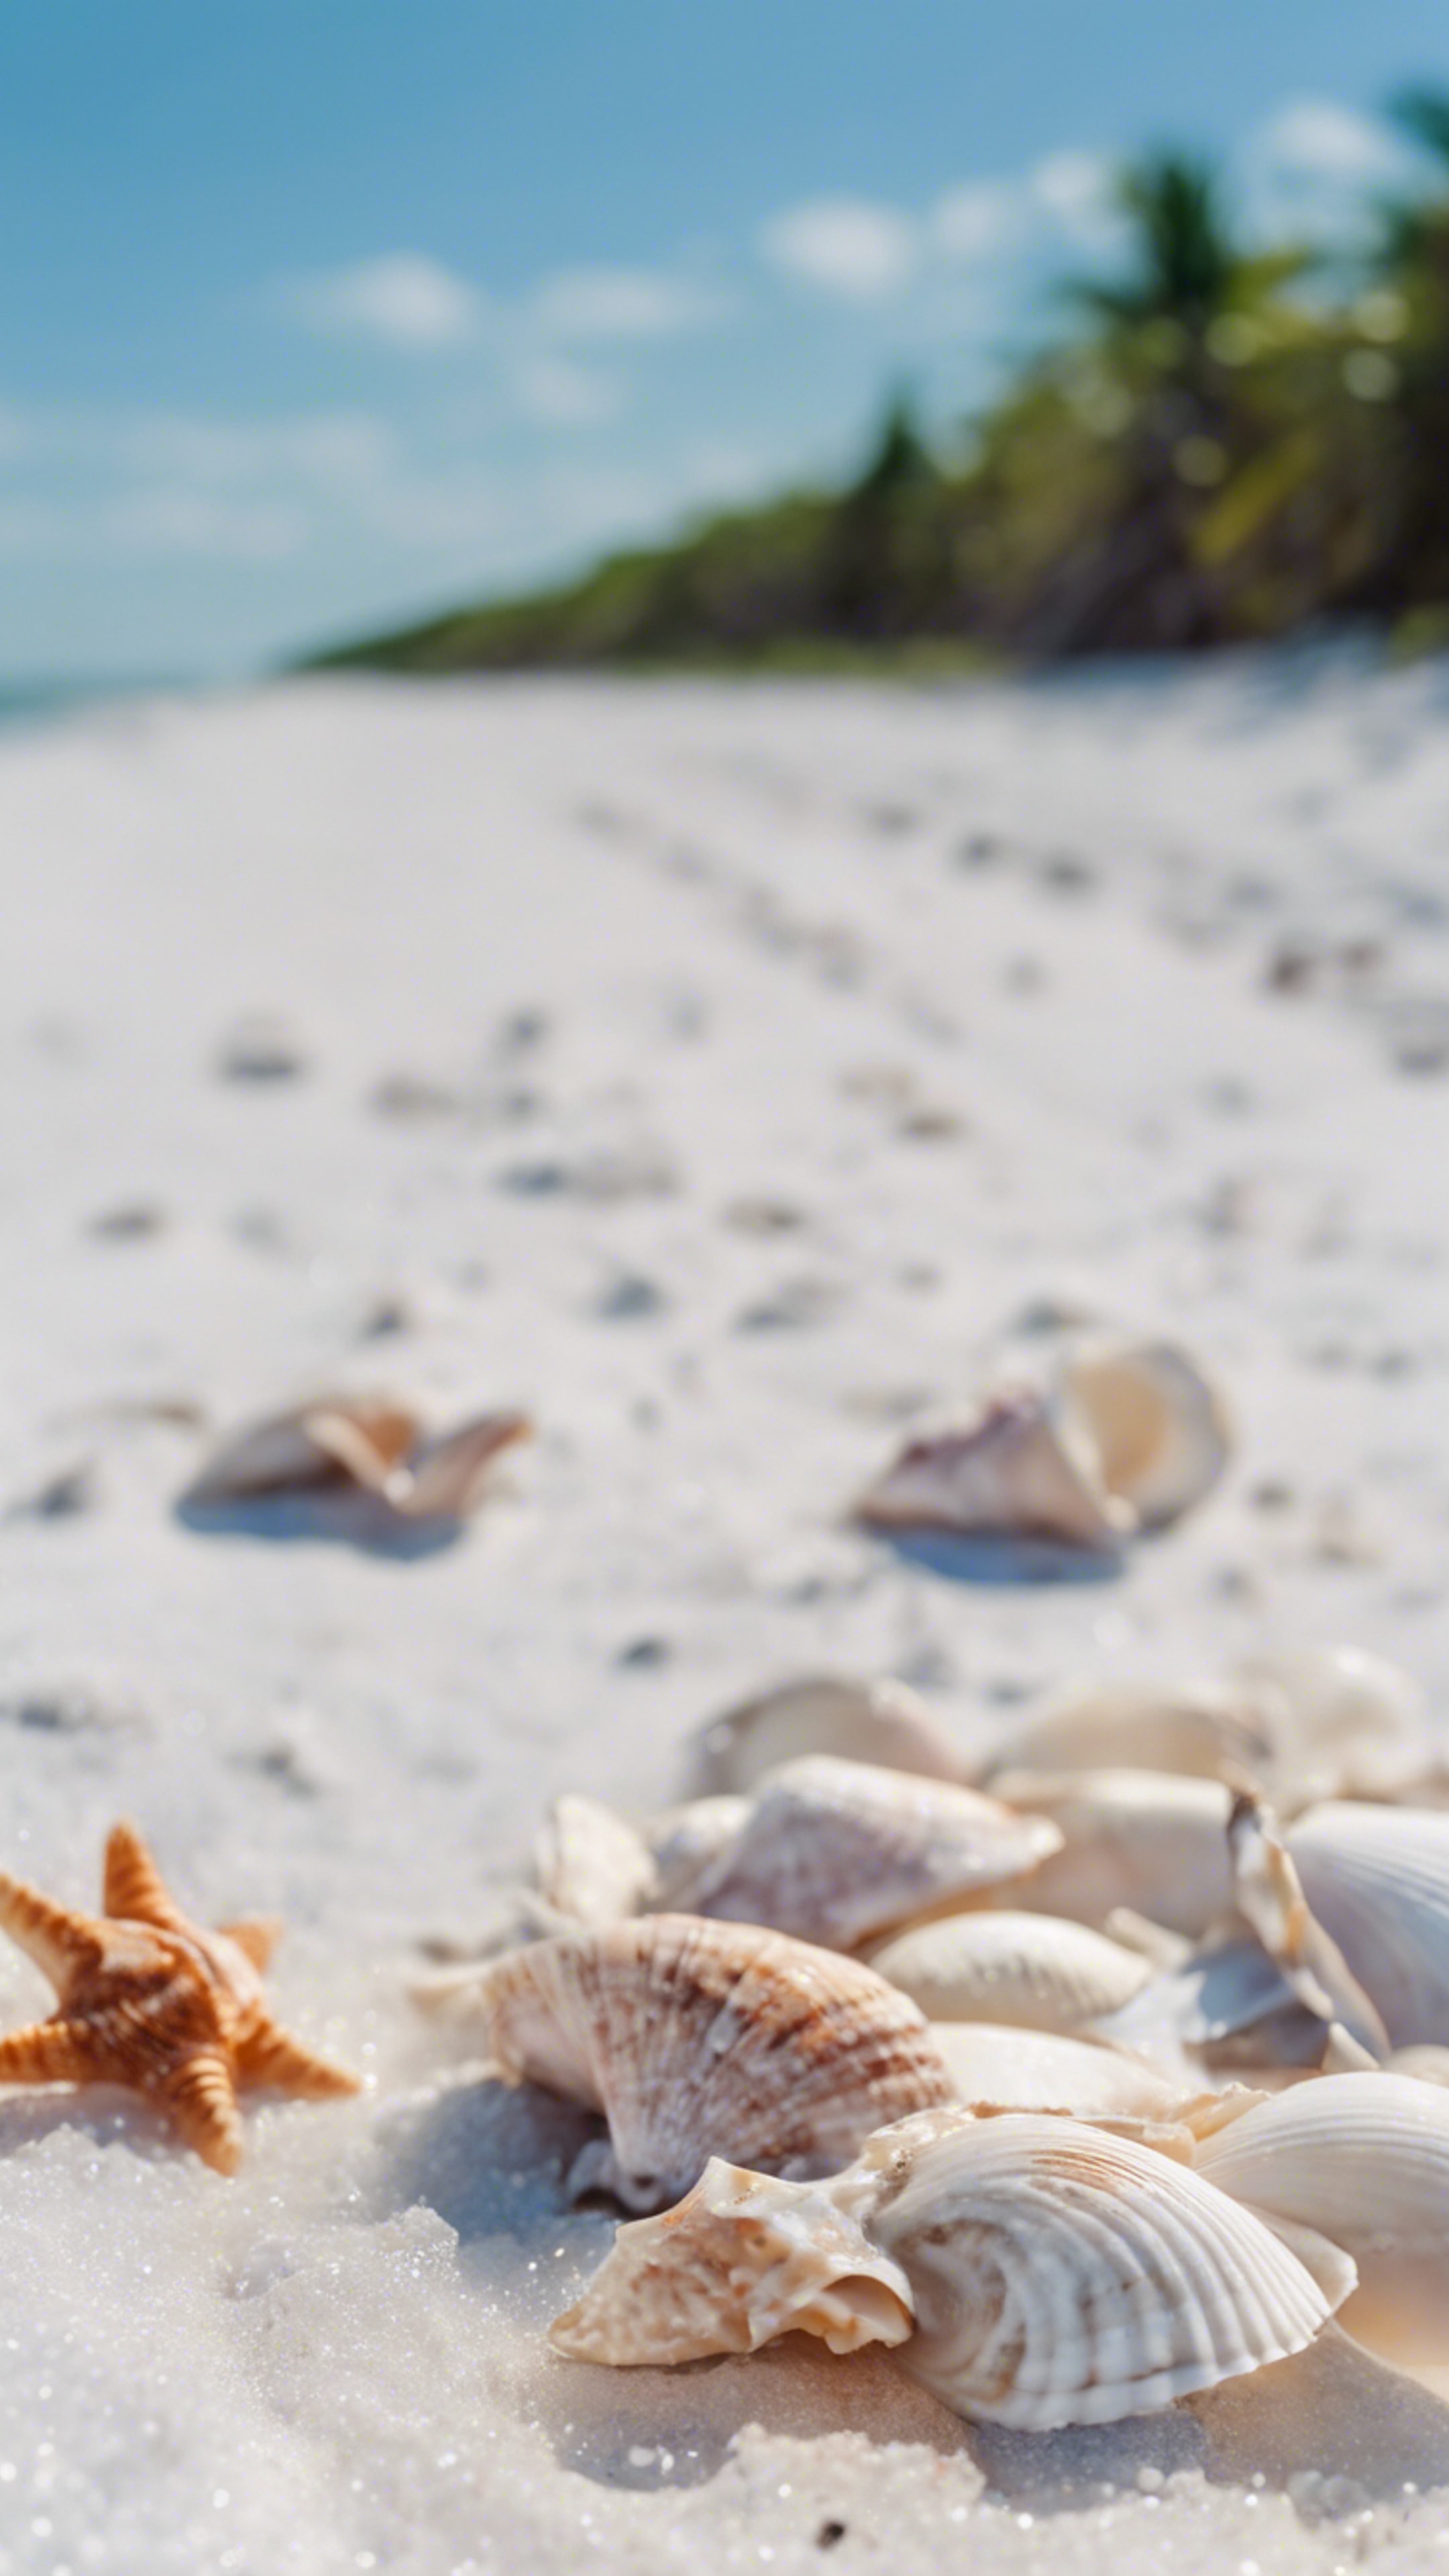 Seashells scattered along the pure white sandy beaches of Sanibel Island under clear, blue skies. Kertas dinding[1c53aef66a12437c830d]